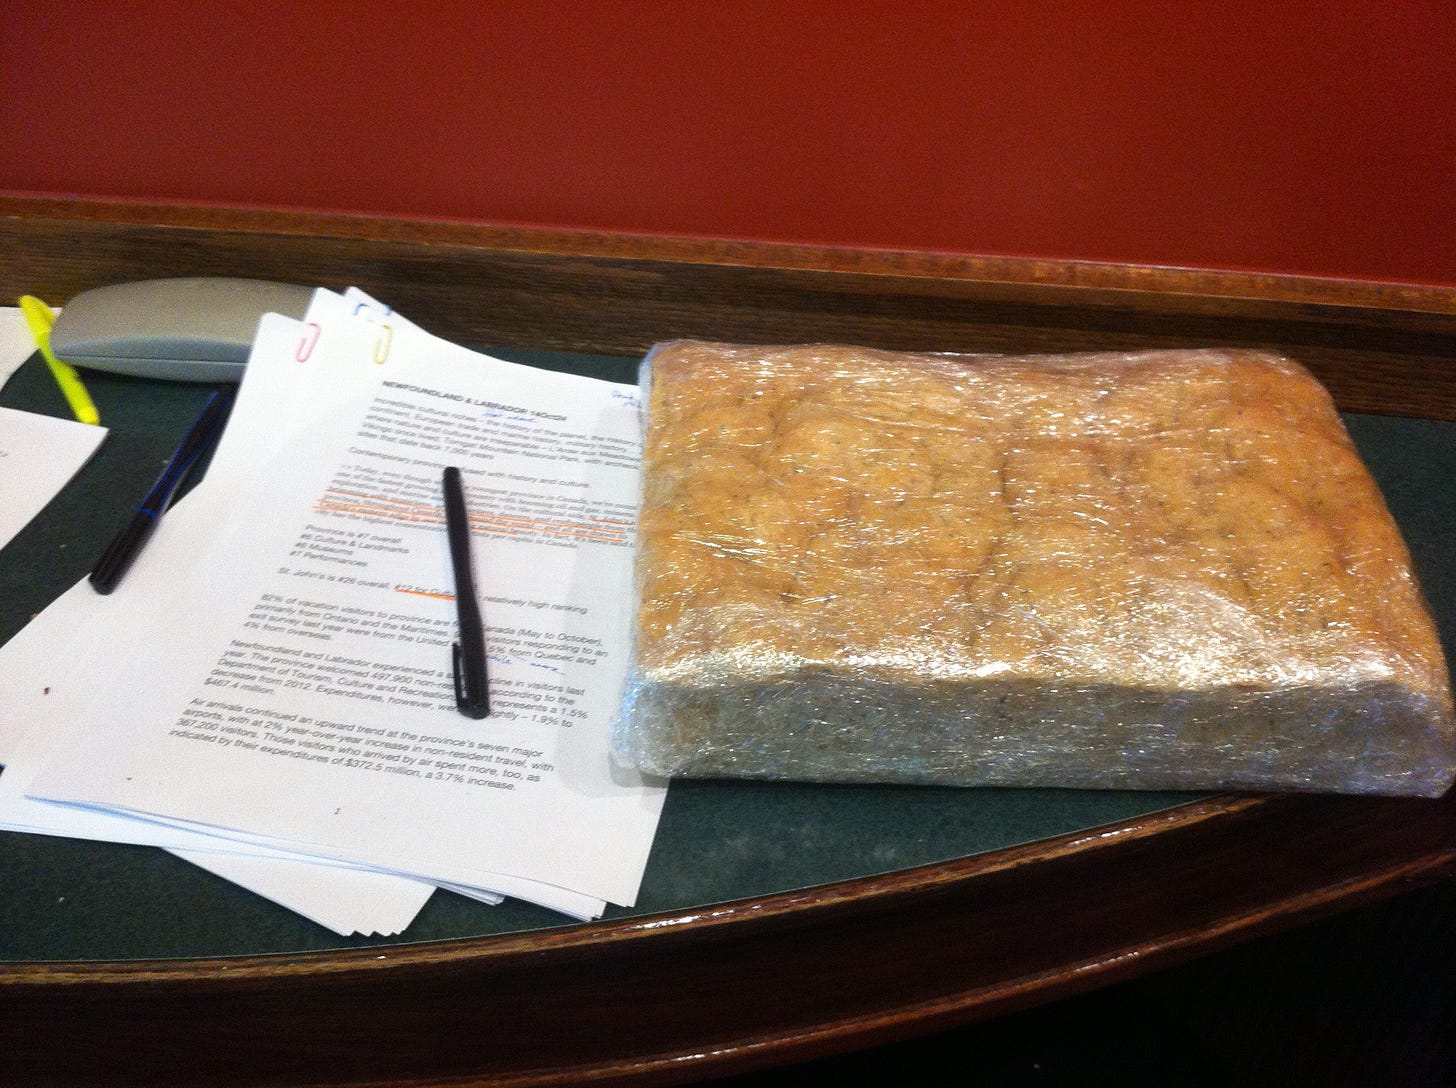 On the left, a stack of printouts with handwritten notes in red and a pen on top. On the right, a square of focaccia bread in plastic wrap.